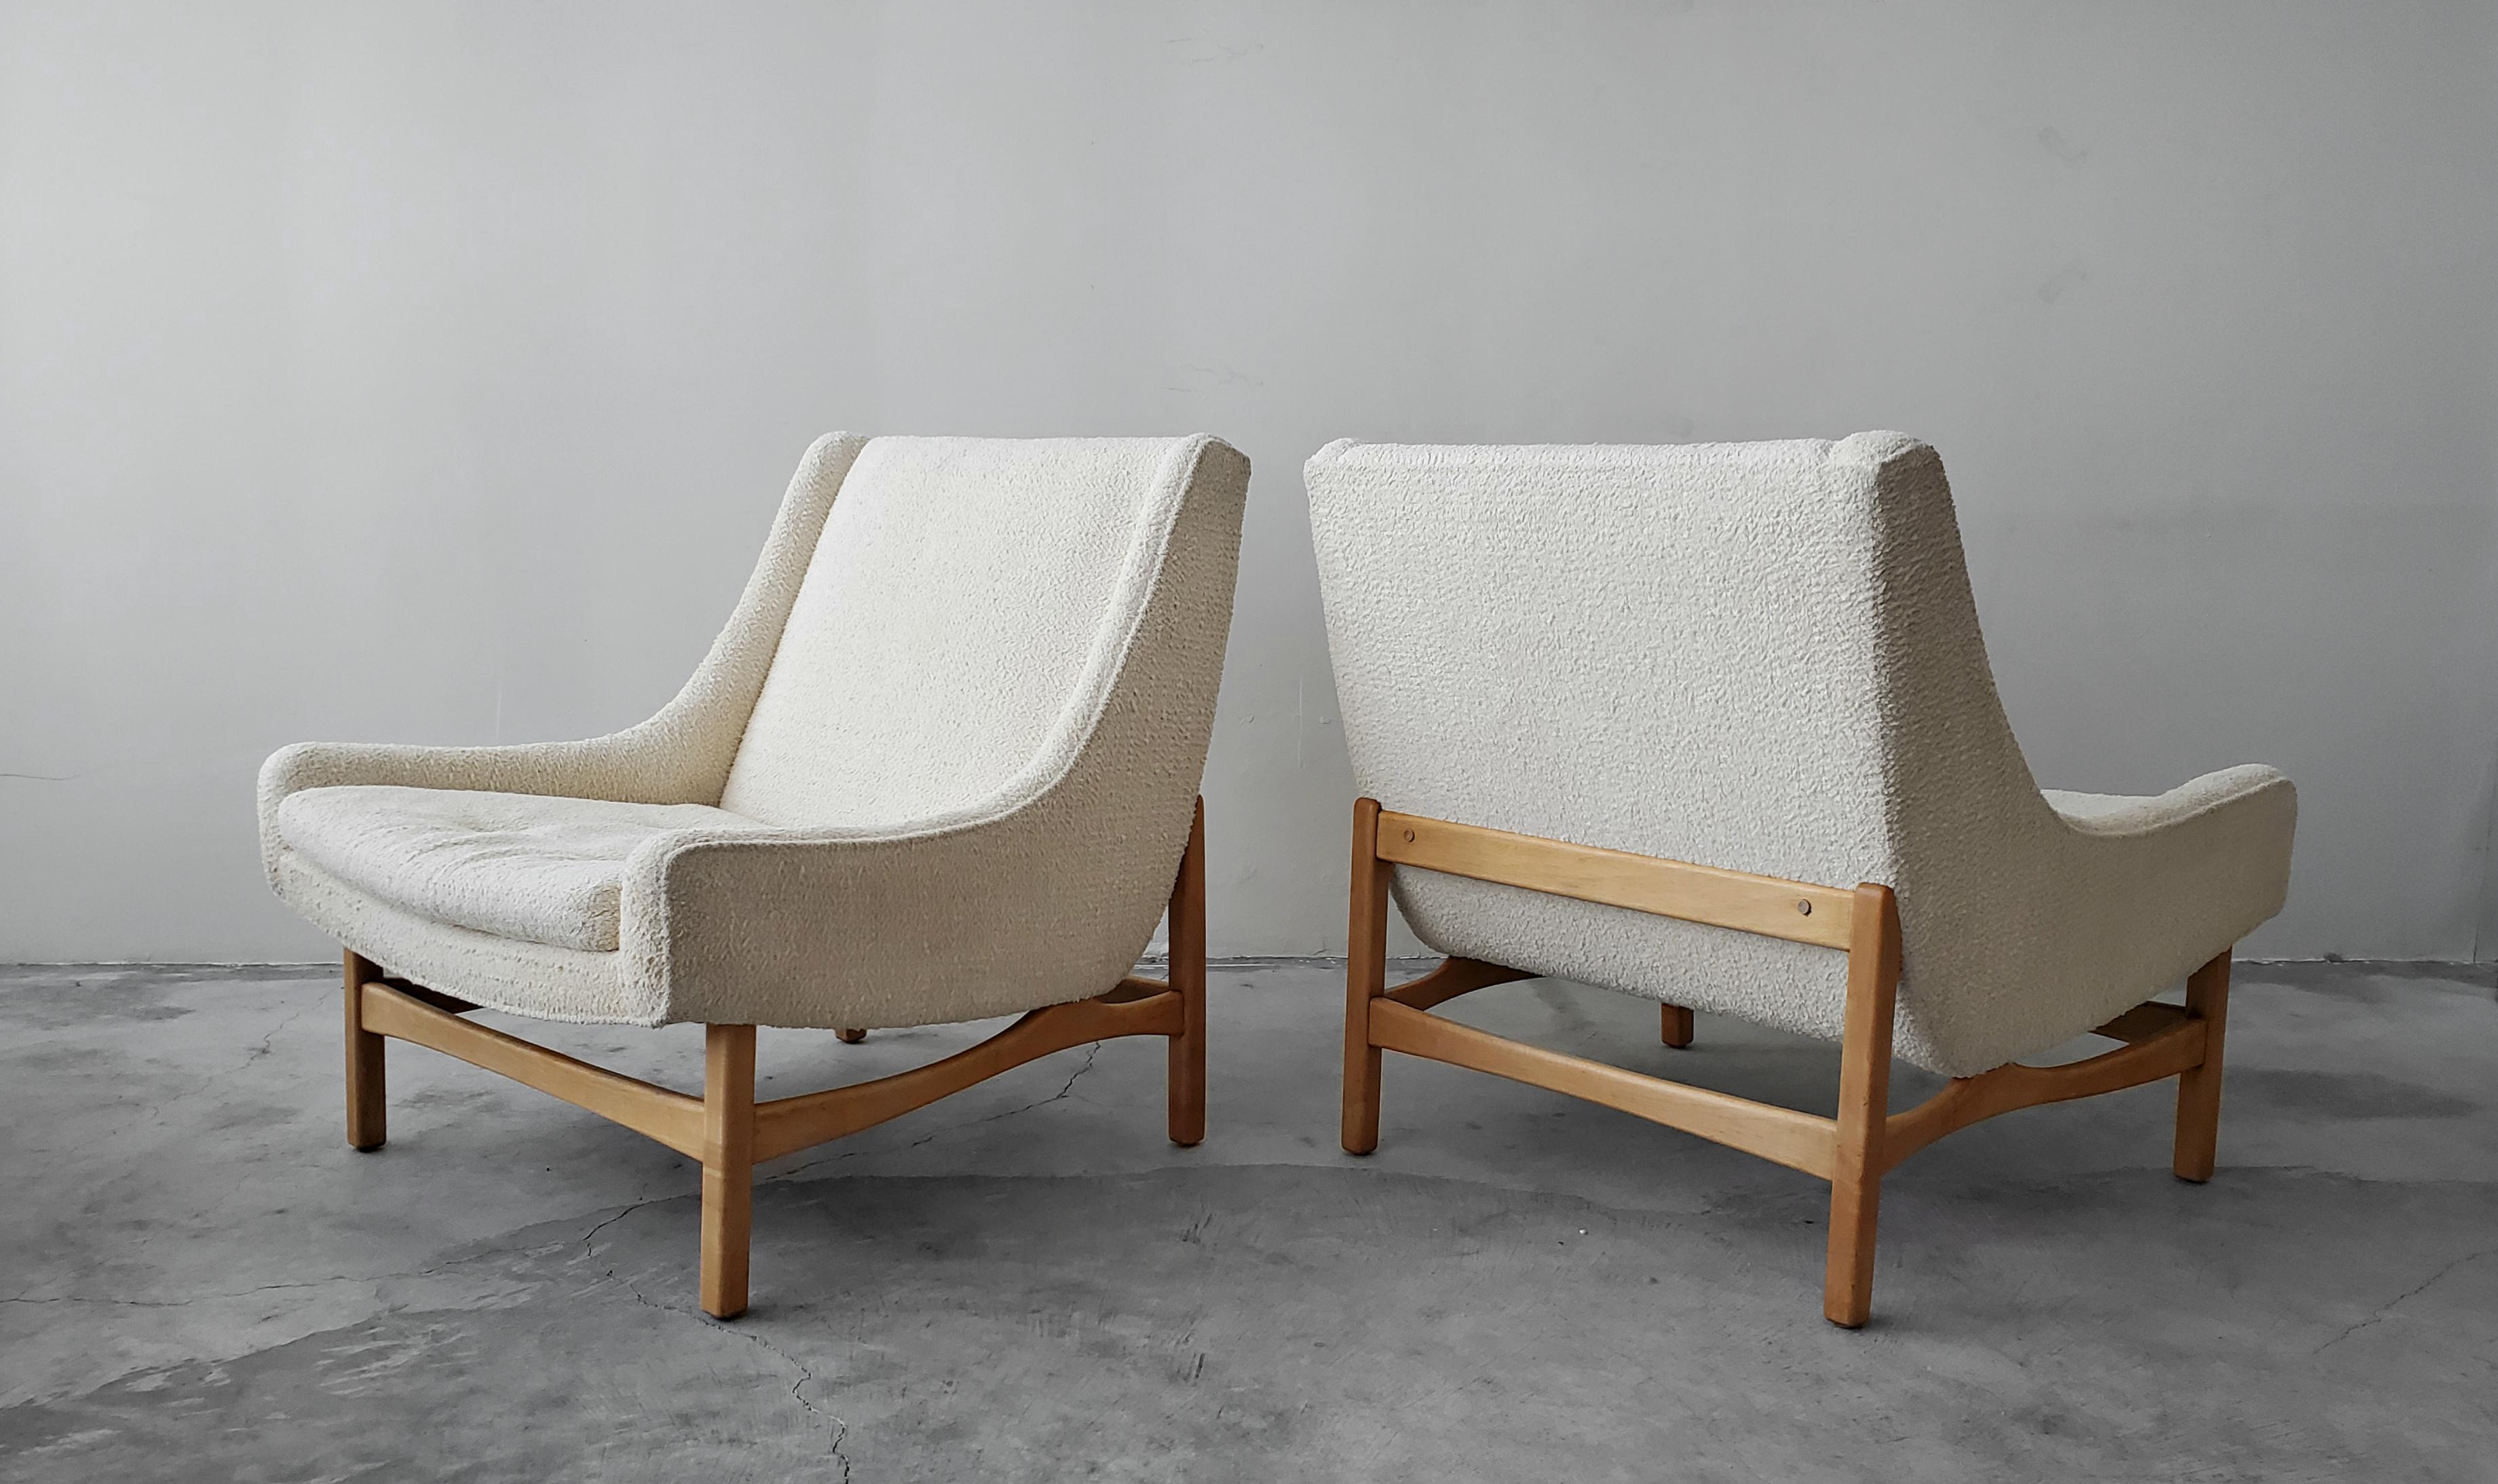 If you're looking for a great pair of midcentury lounge chairs, with the most amazing lines, look no further. These chairs are absolutely stunning from Every Angle.

We have left them as found in their all original bouclé fabric to give an idea of